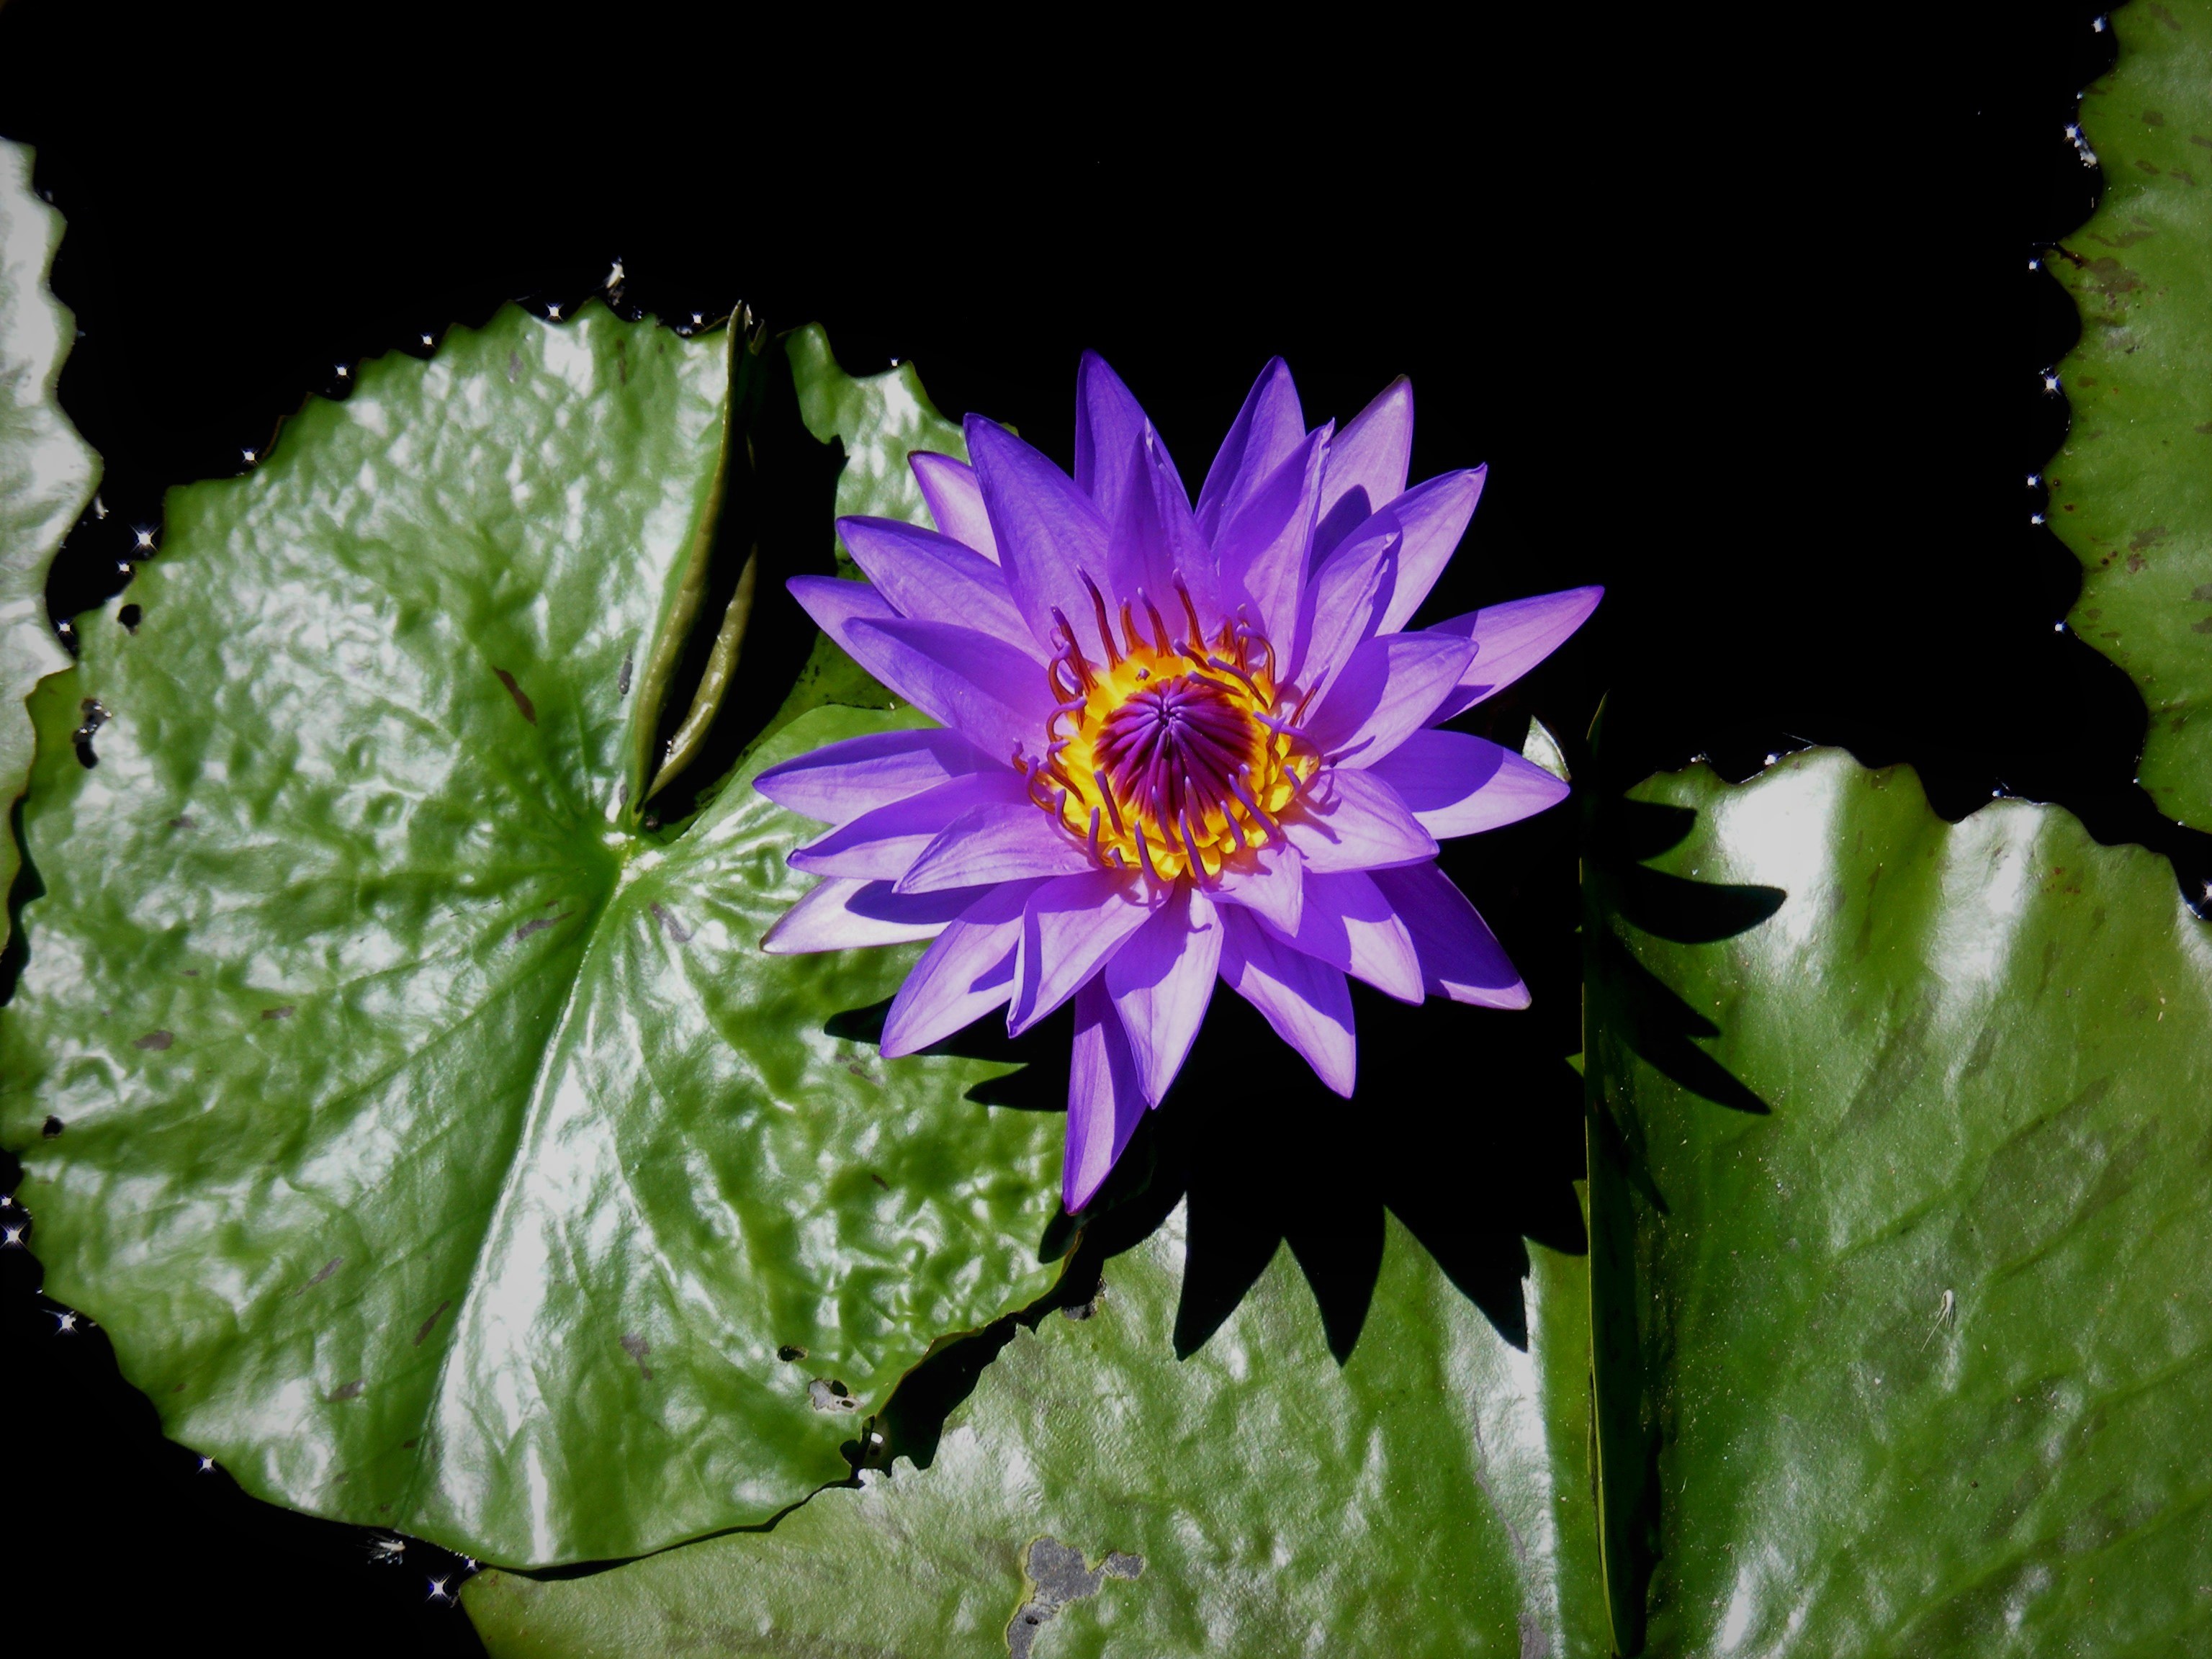 Earth Flower Lily Pad Purple Flower Water Lily 3072x2304